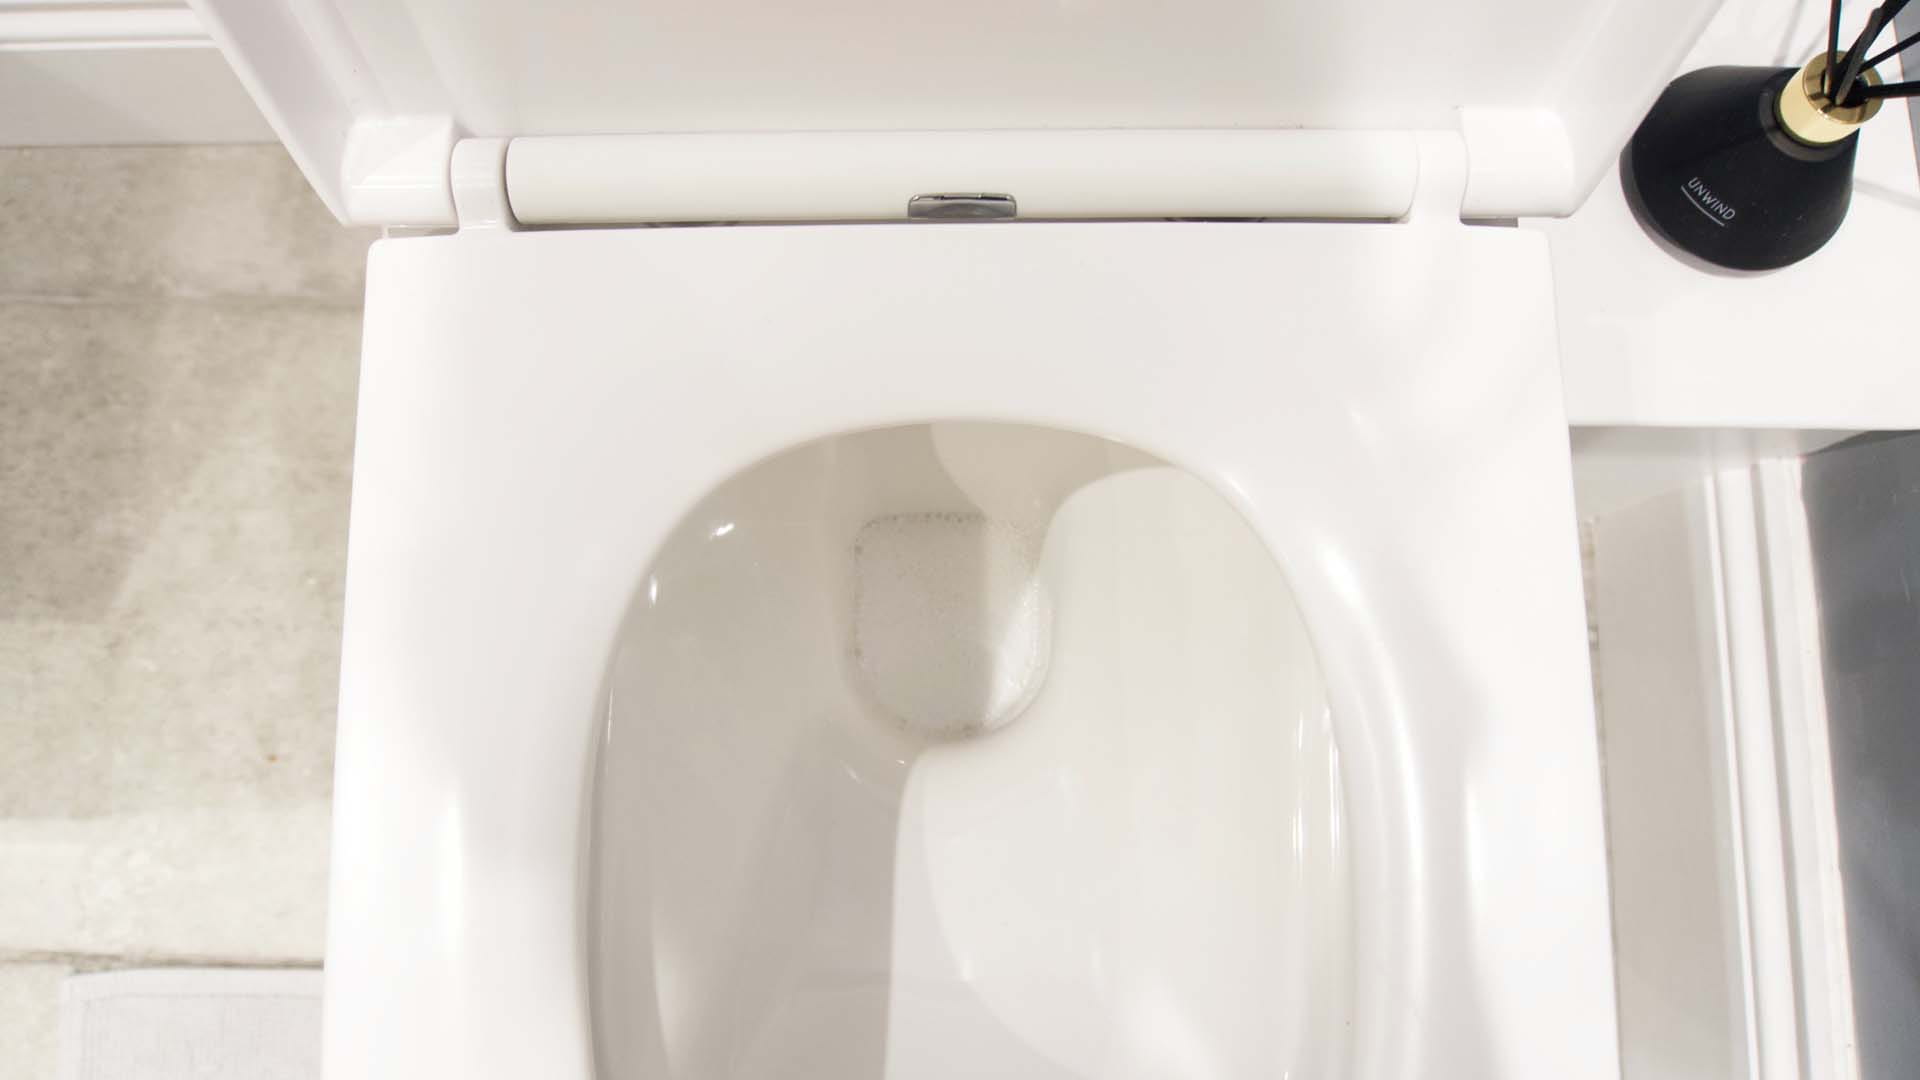 A toilet with a fizzing homemade toilet bomb in the bowl